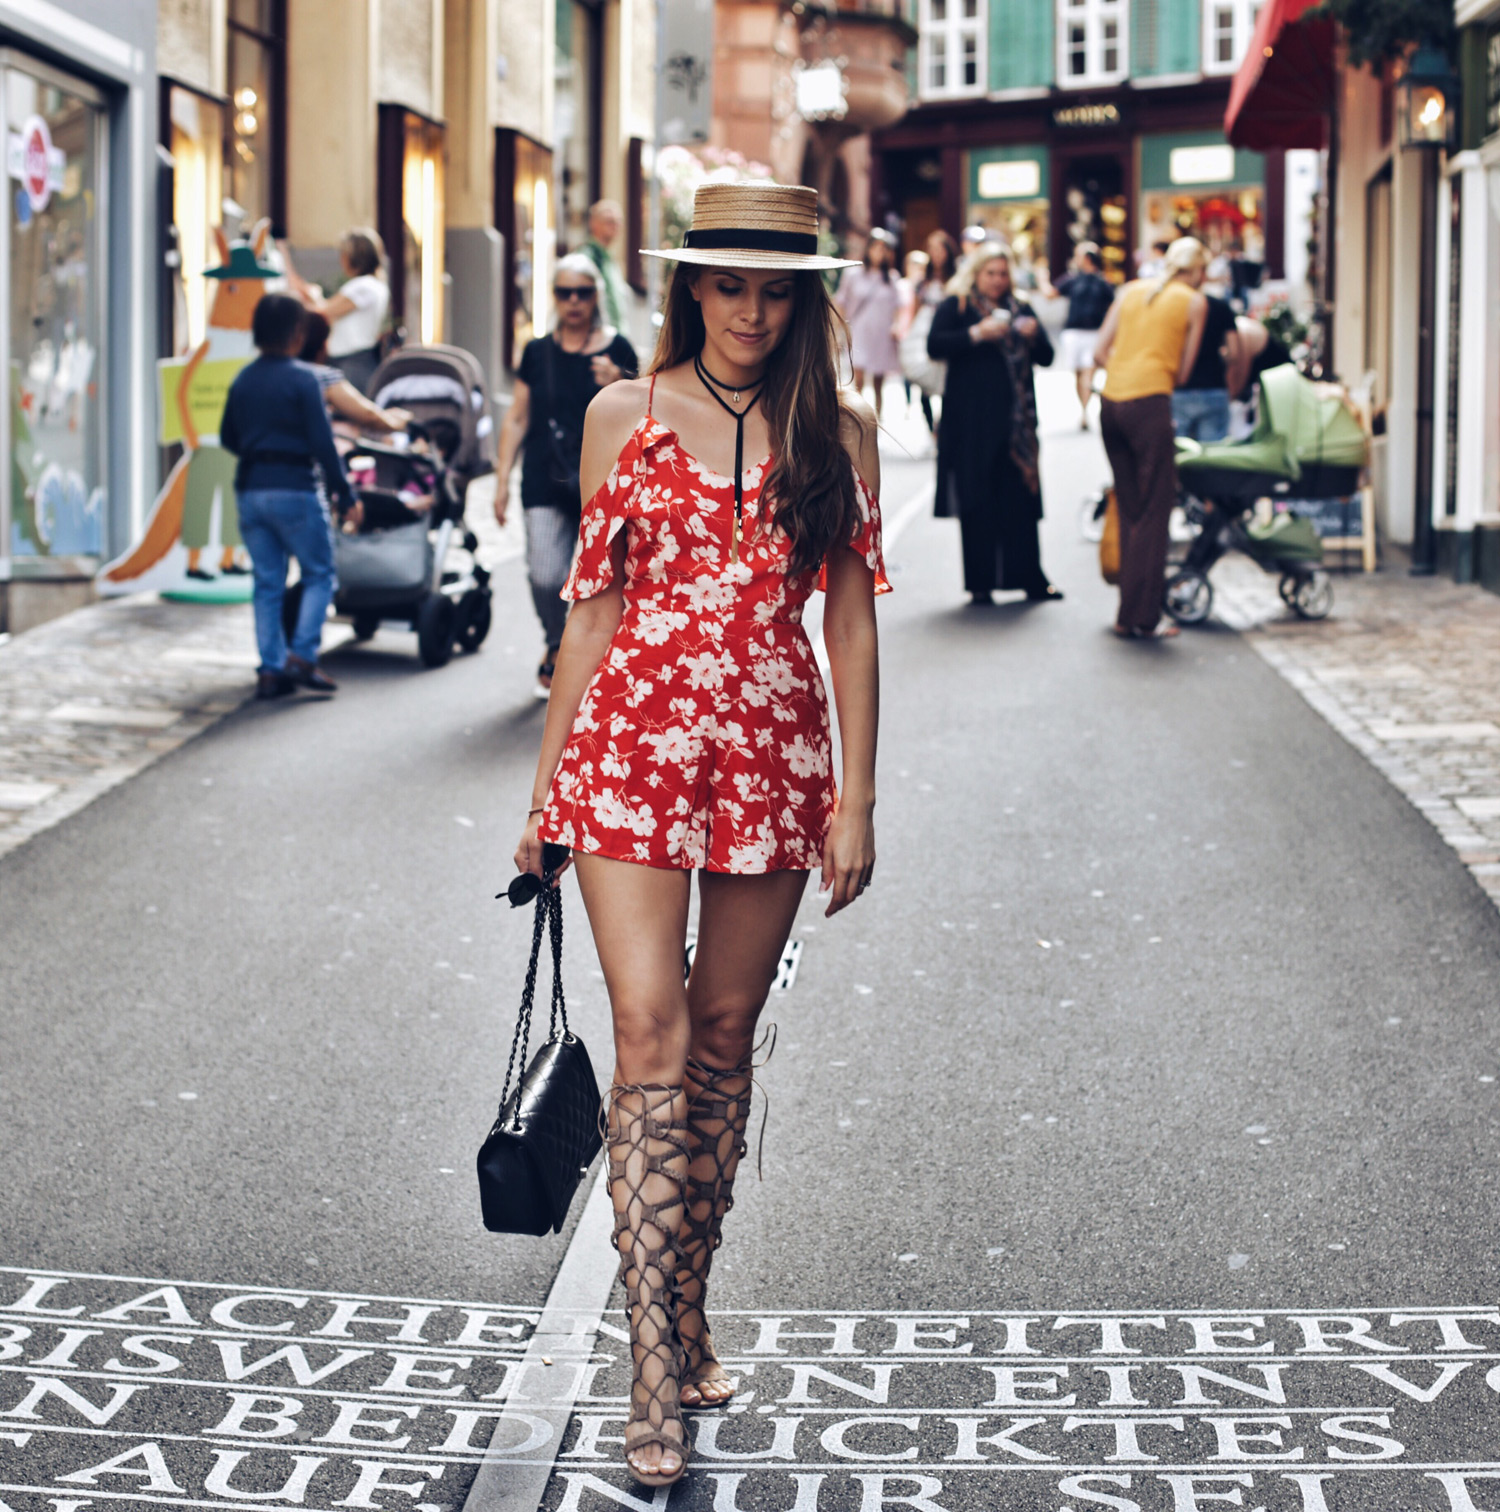 Rompin' in Basel Switzerland | The Charming Olive by Adelina Perrin